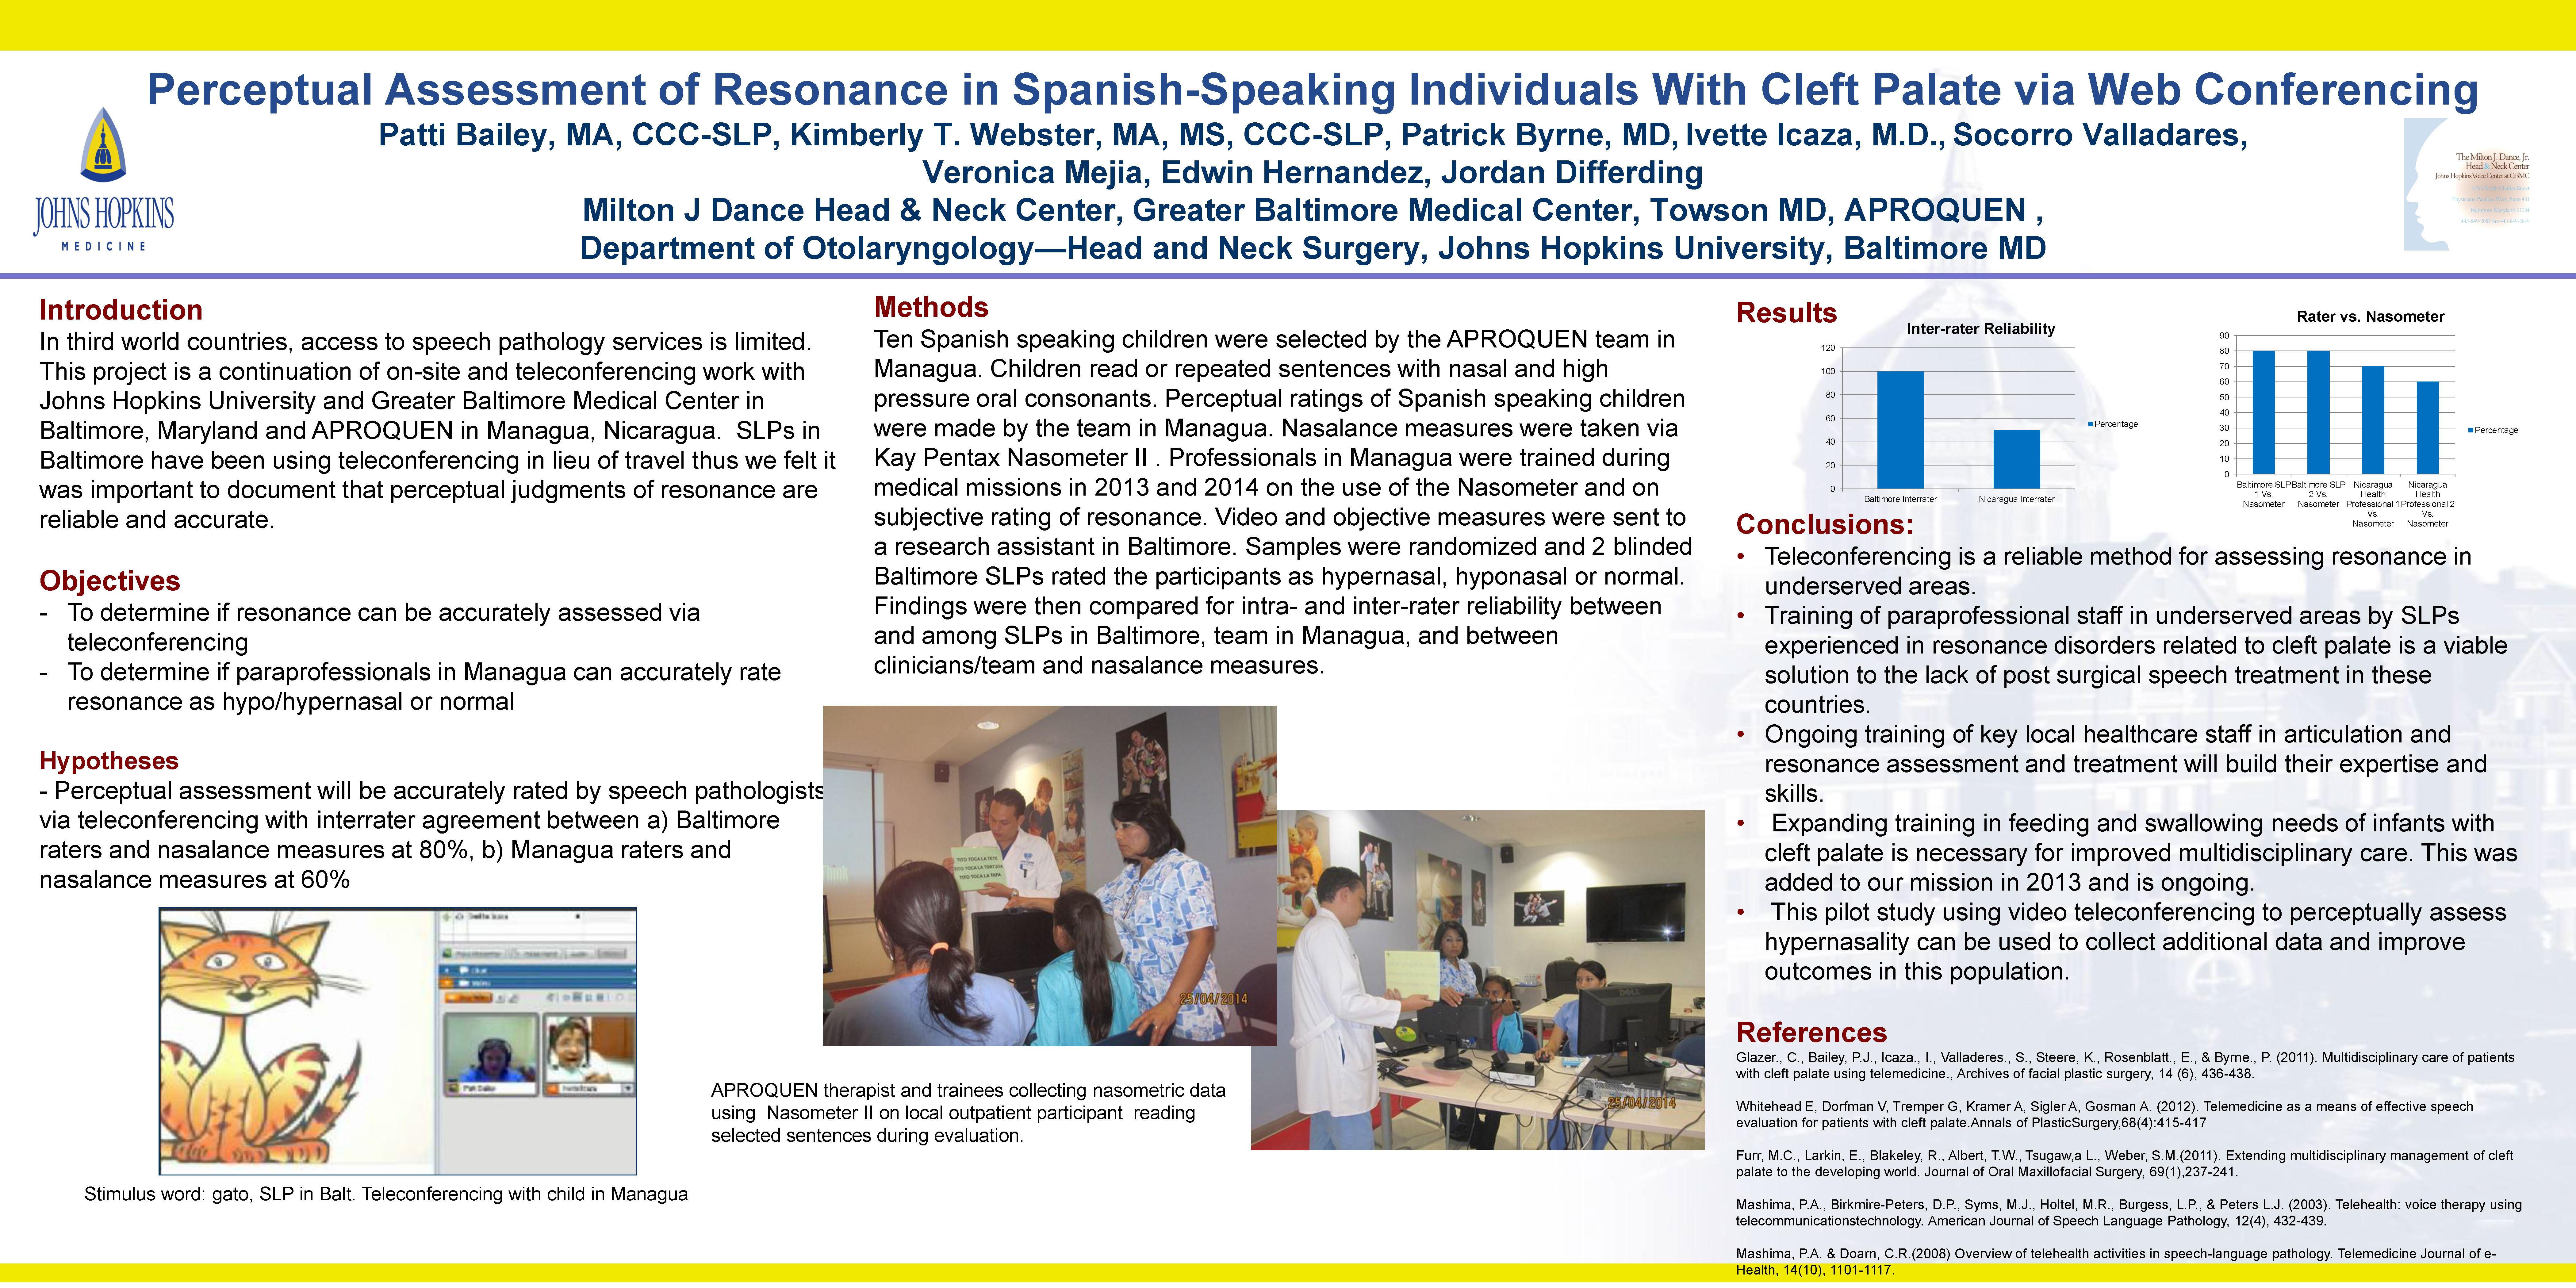 poster image: Perceptual Assessment of Resonance in Spanish-Speaking Individuals With Cleft Palate via Web Conferencing